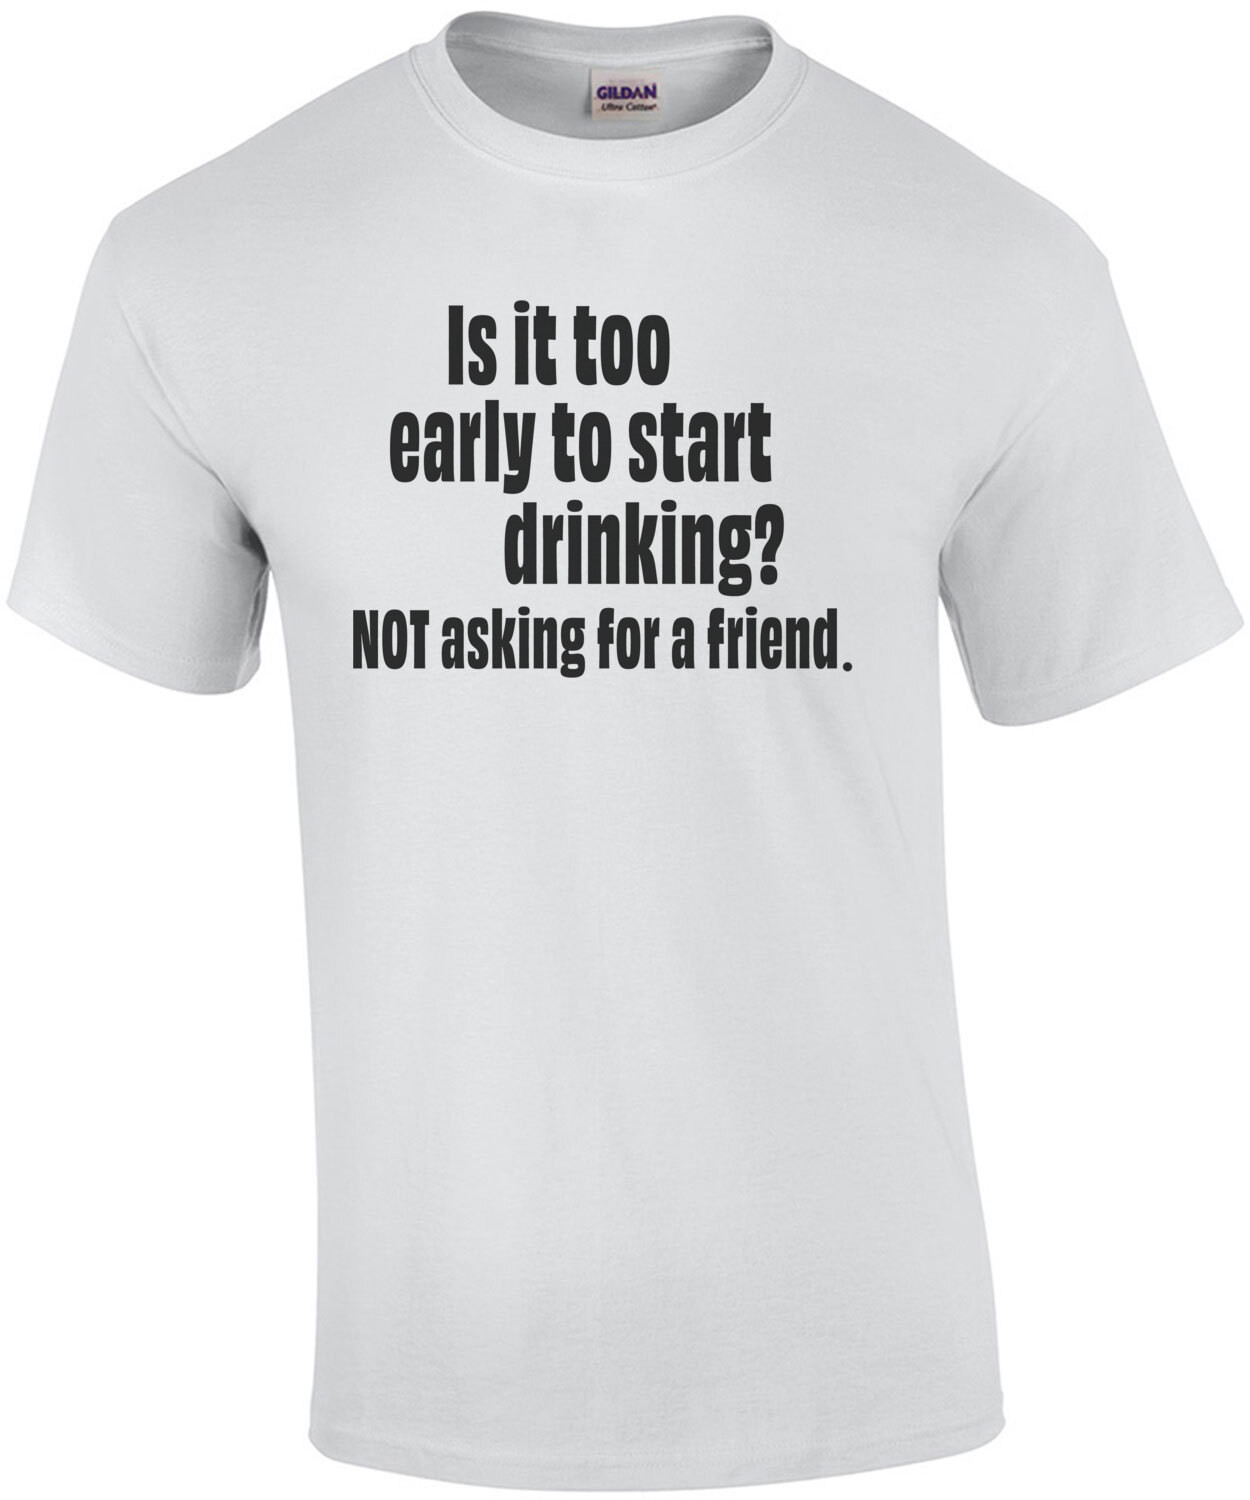 Is it too early to start drinking? NOT asking for a friend - funny drinking t-shirt